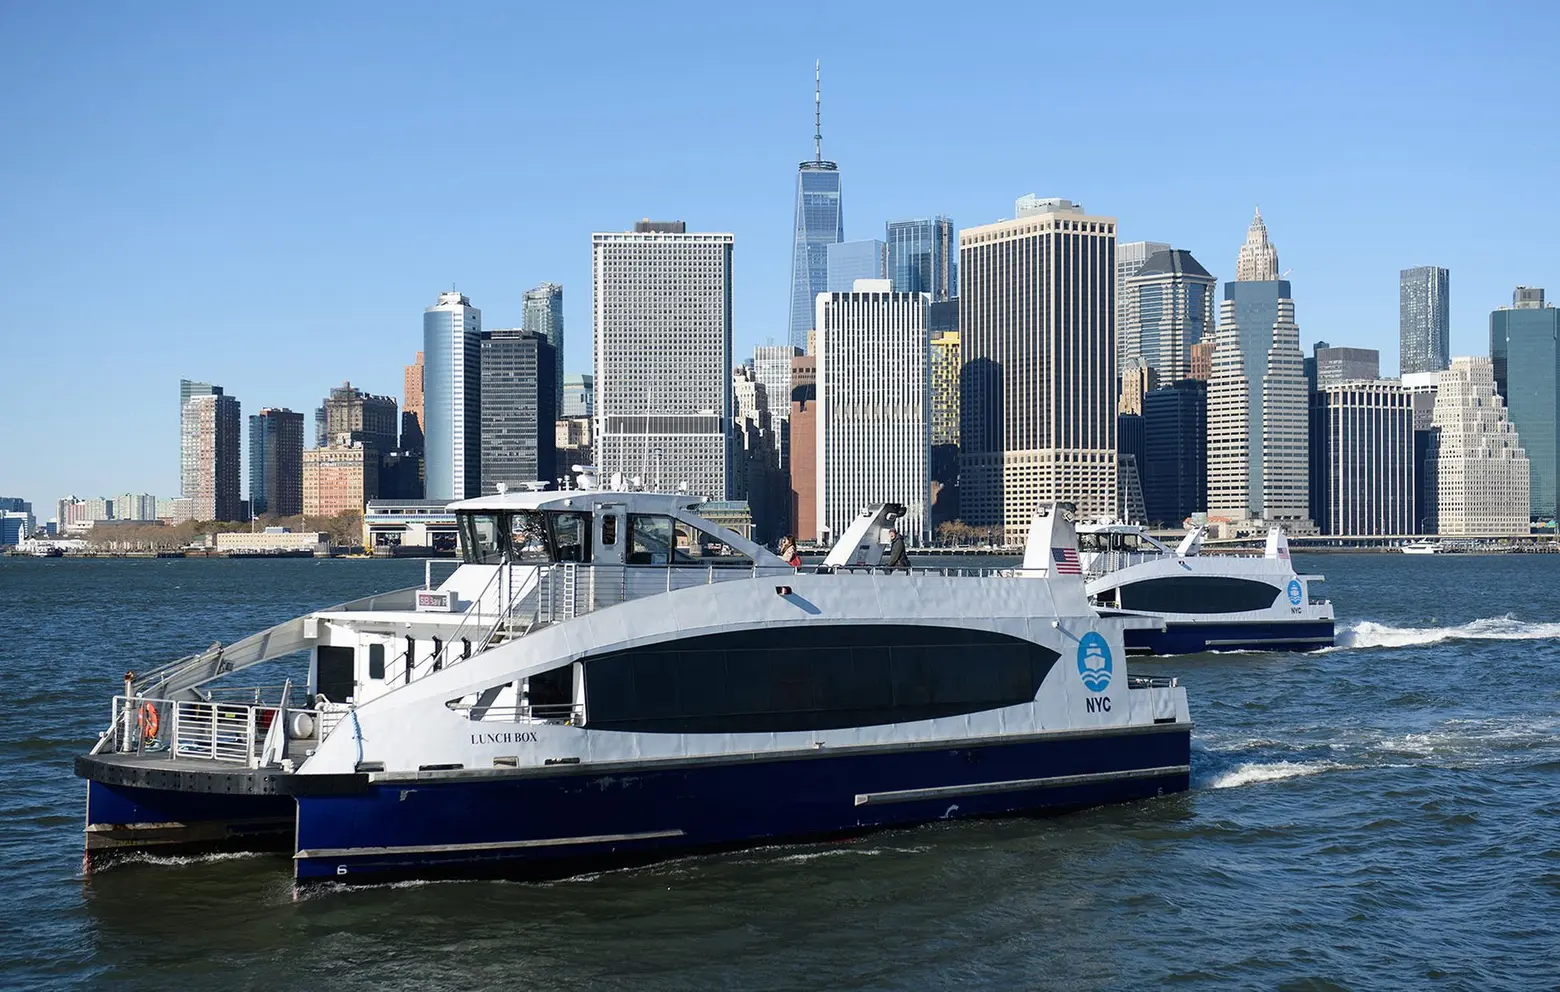 NYC Ferry now connects the South Bronx and Wall Street, cutting travel time in half